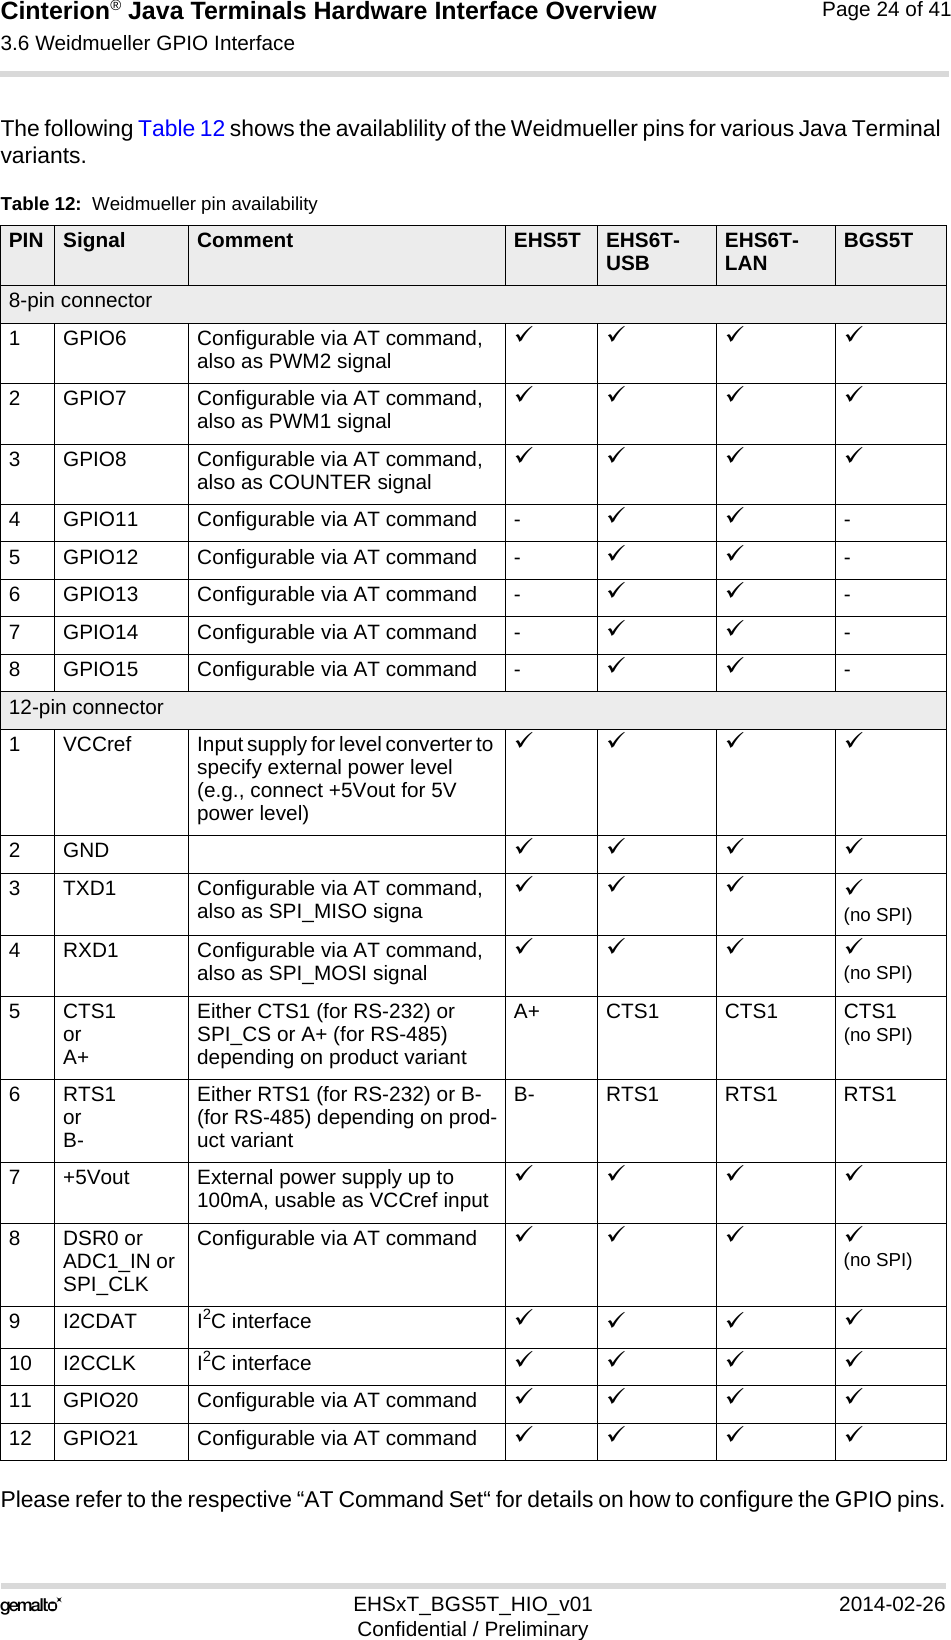 Cinterion® Java Terminals Hardware Interface Overview3.6 Weidmueller GPIO Interface32EHSxT_BGS5T_HIO_v01 2014-02-26Confidential / PreliminaryPage 24 of 41The following Table 12 shows the availablility of the Weidmueller pins for various Java Terminal variants. Please refer to the respective “AT Command Set“ for details on how to configure the GPIO pins.Table 12:  Weidmueller pin availabilityPIN Signal Comment EHS5T EHS6T-USB EHS6T-LAN BGS5T8-pin connector1 GPIO6 Configurable via AT command, also as PWM2 signal  2 GPIO7 Configurable via AT command, also as PWM1 signal  3 GPIO8 Configurable via AT command, also as COUNTER signal  4 GPIO11 Configurable via AT command - -5 GPIO12 Configurable via AT command - -6 GPIO13 Configurable via AT command - -7 GPIO14 Configurable via AT command - -8 GPIO15 Configurable via AT command - -12-pin connector1 VCCref Input supply for level converter to specify external power level (e.g., connect +5Vout for 5V power level)  2GND   3 TXD1 Configurable via AT command, also as SPI_MISO signa   (no SPI)4 RXD1 Configurable via AT command, also as SPI_MOSI signal   (no SPI)5CTS1 orA+Either CTS1 (for RS-232) or SPI_CS or A+ (for RS-485) depending on product variantA+ CTS1 CTS1 CTS1 (no SPI)6RTS1or B-Either RTS1 (for RS-232) or B- (for RS-485) depending on prod-uct variantB- RTS1 RTS1 RTS17 +5Vout External power supply up to 100mA, usable as VCCref input  8 DSR0 or ADC1_IN or SPI_CLKConfigurable via AT command    (no SPI)9 I2CDAT I2C interface    10 I2CCLK I2C interface   11 GPIO20 Configurable via AT command   12 GPIO21 Configurable via AT command   